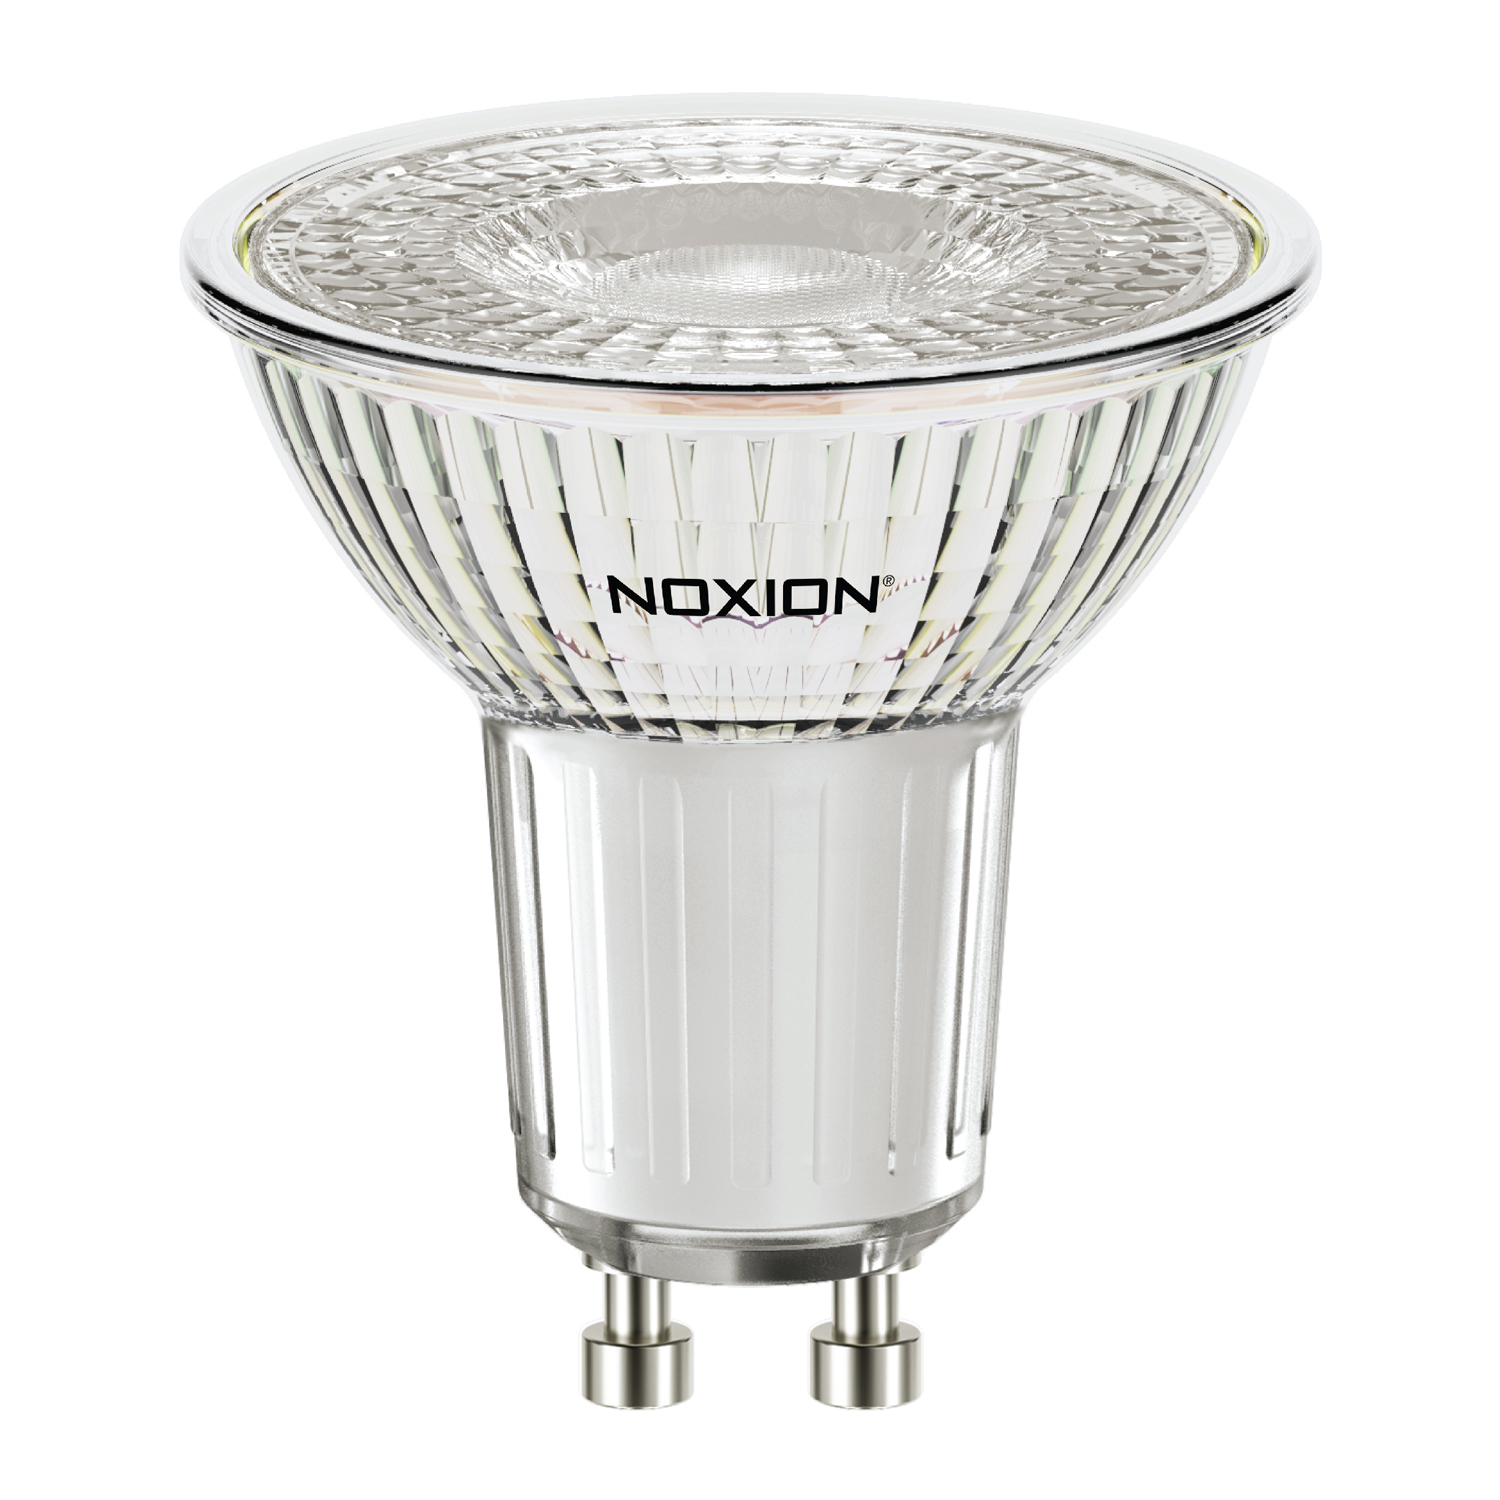 Noxion LEDspot PerfectColor GU10 4W 927 36D | Extra Warm White - Dimmable - Replaces 35W